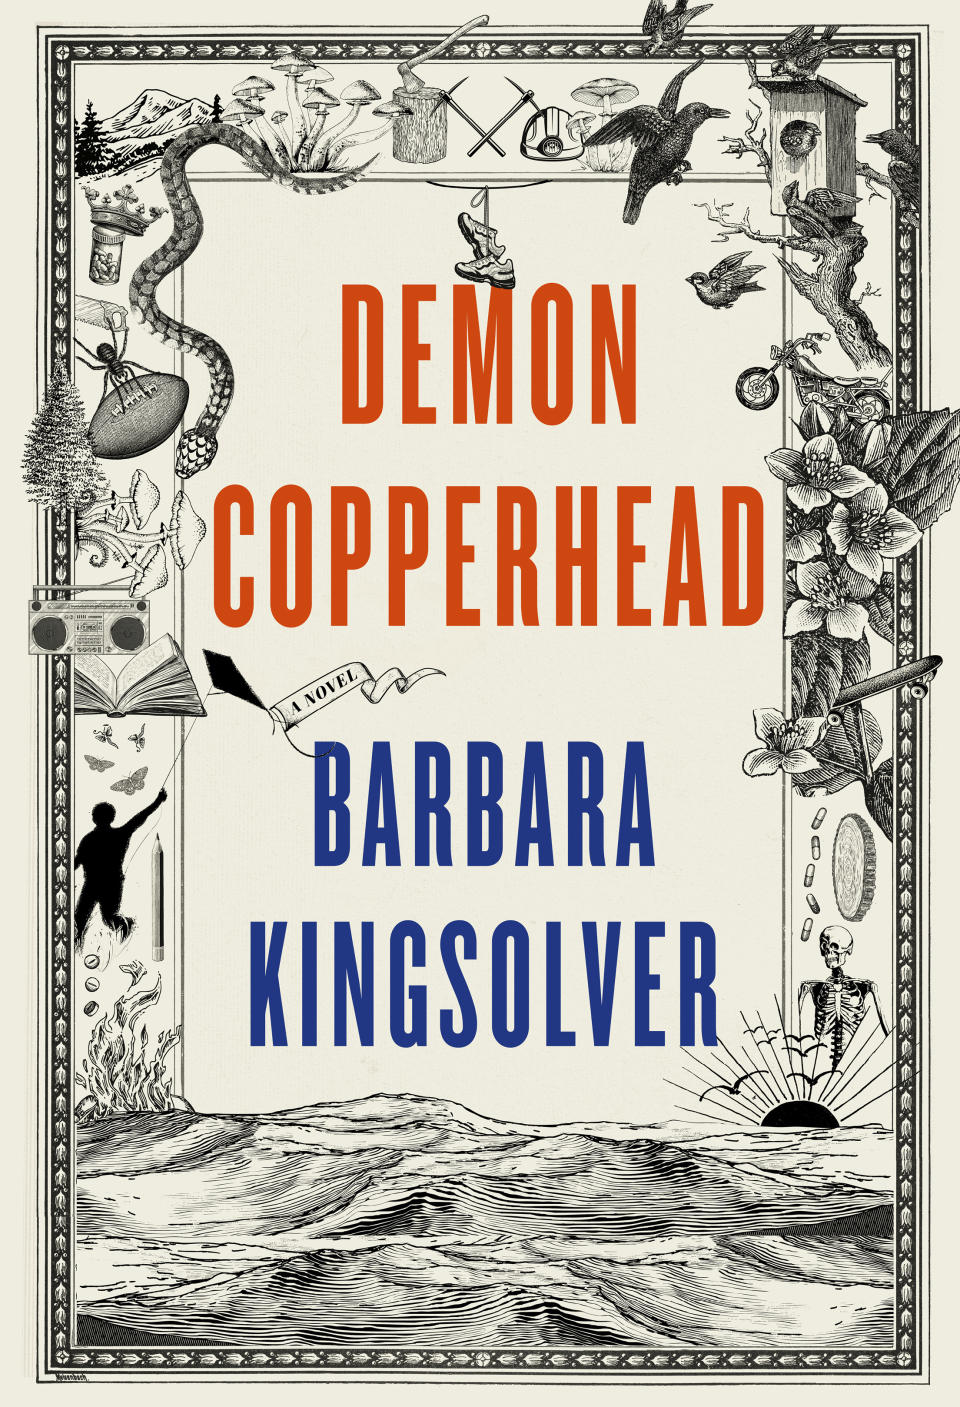 This image released by Harper shows cover art for "Demon Coppergead," by Barbara Kingsolver, winner of the Pulitzer Prize for fiction. (Harper via AP)